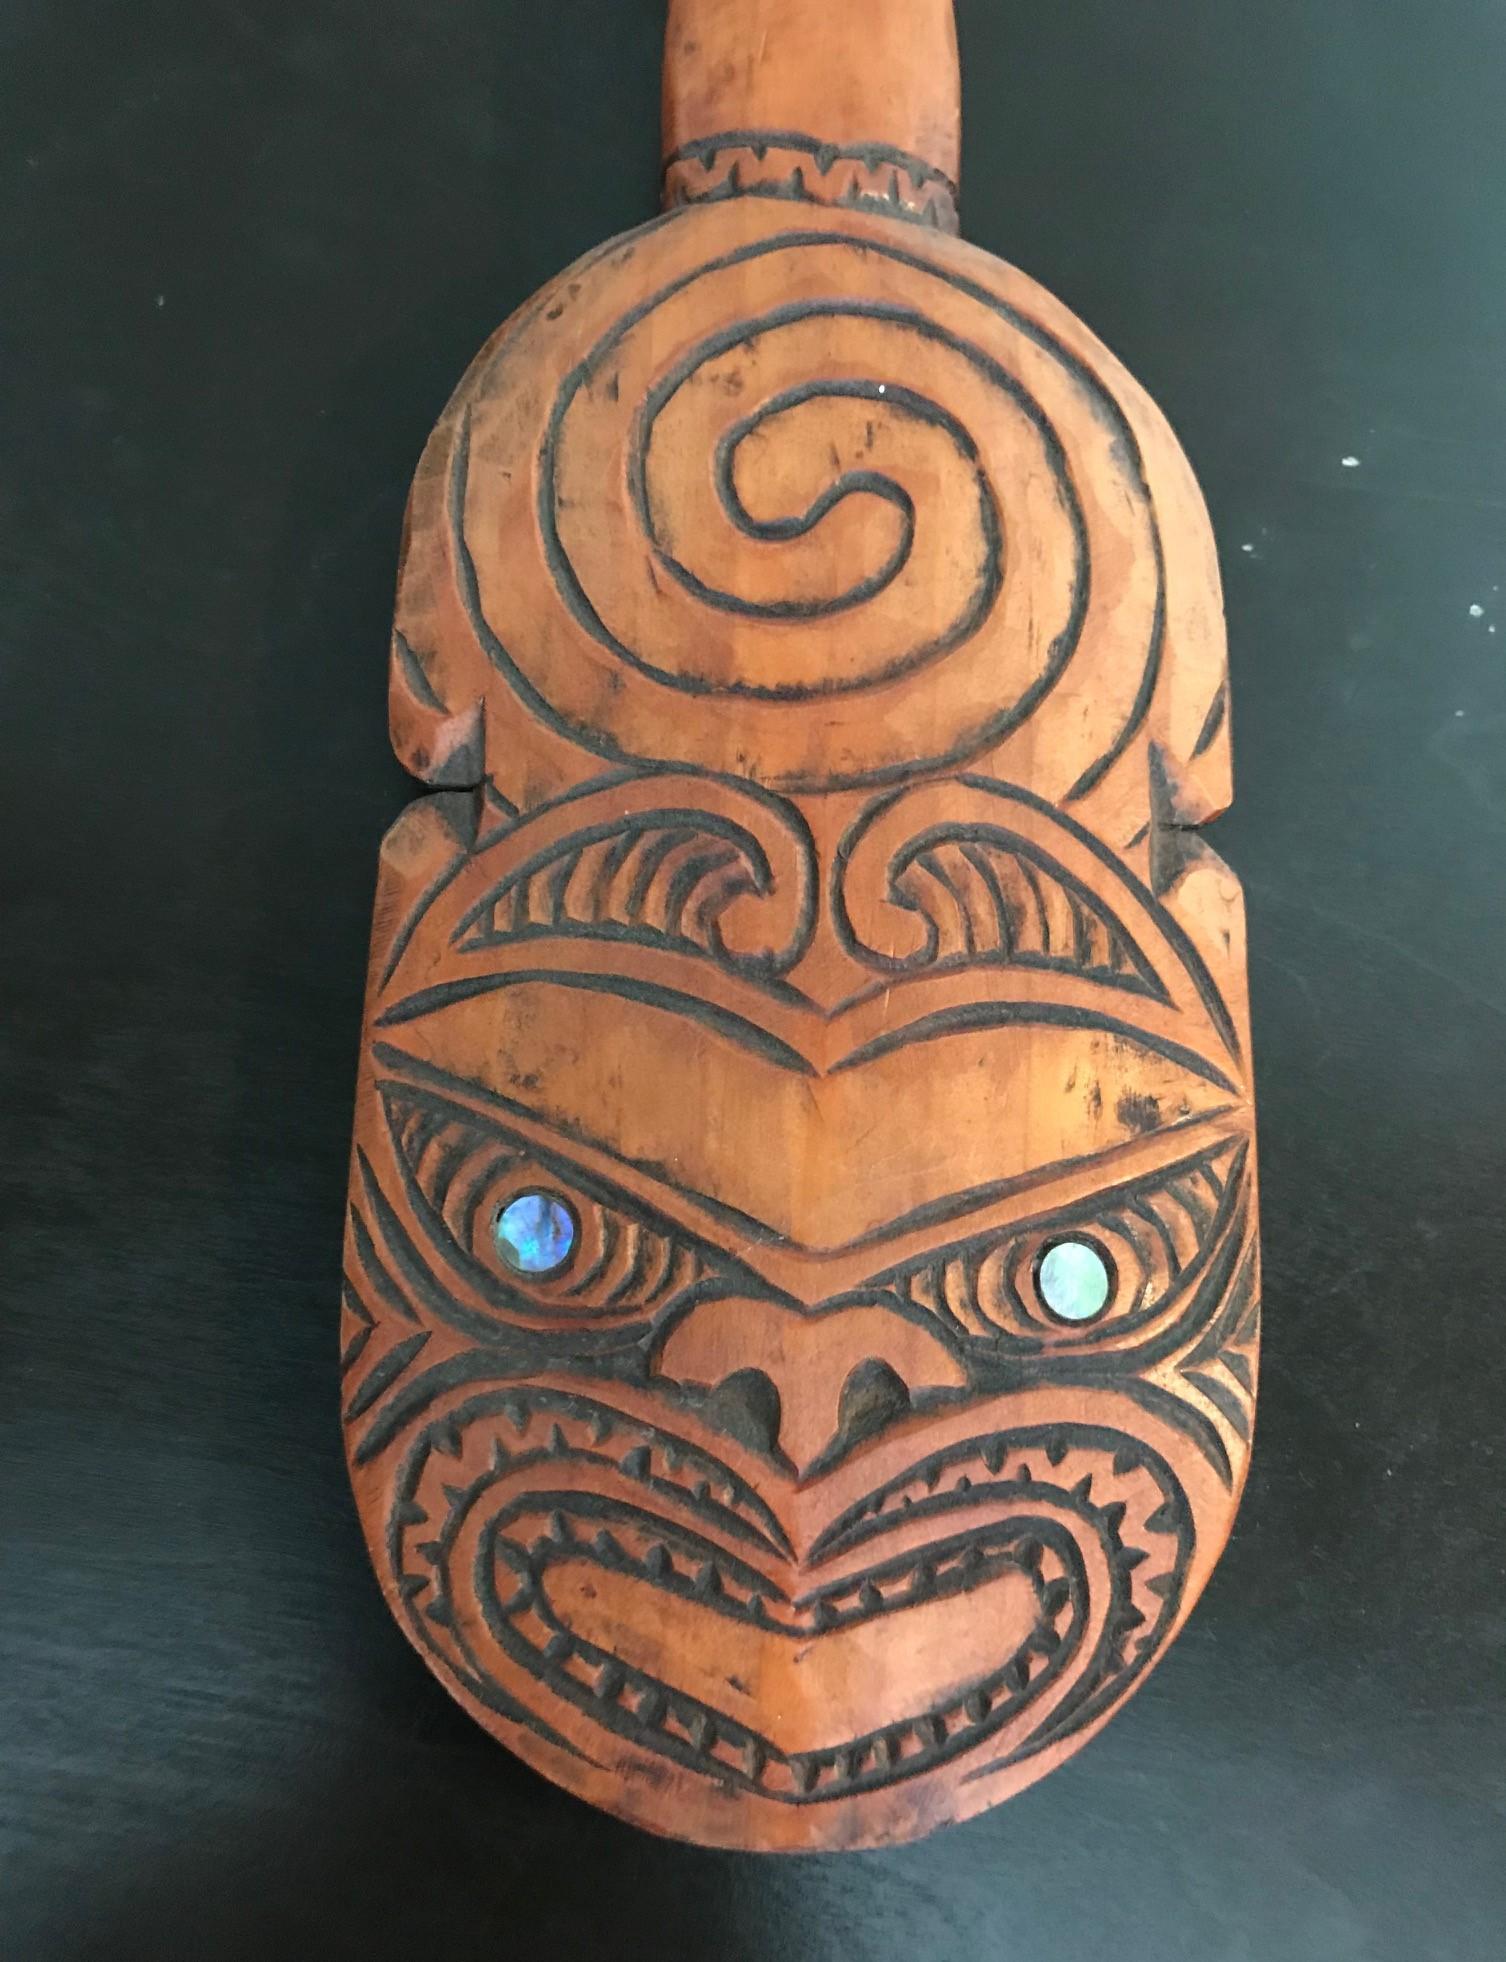 Great piece made by the Maori People of New Zealand. Hand carved and decorated. 

A patu is a club or pounder and was originally designed and carved from wood by the Maori people as a weapon to strike, hit, beat, or subdue their opponents. This